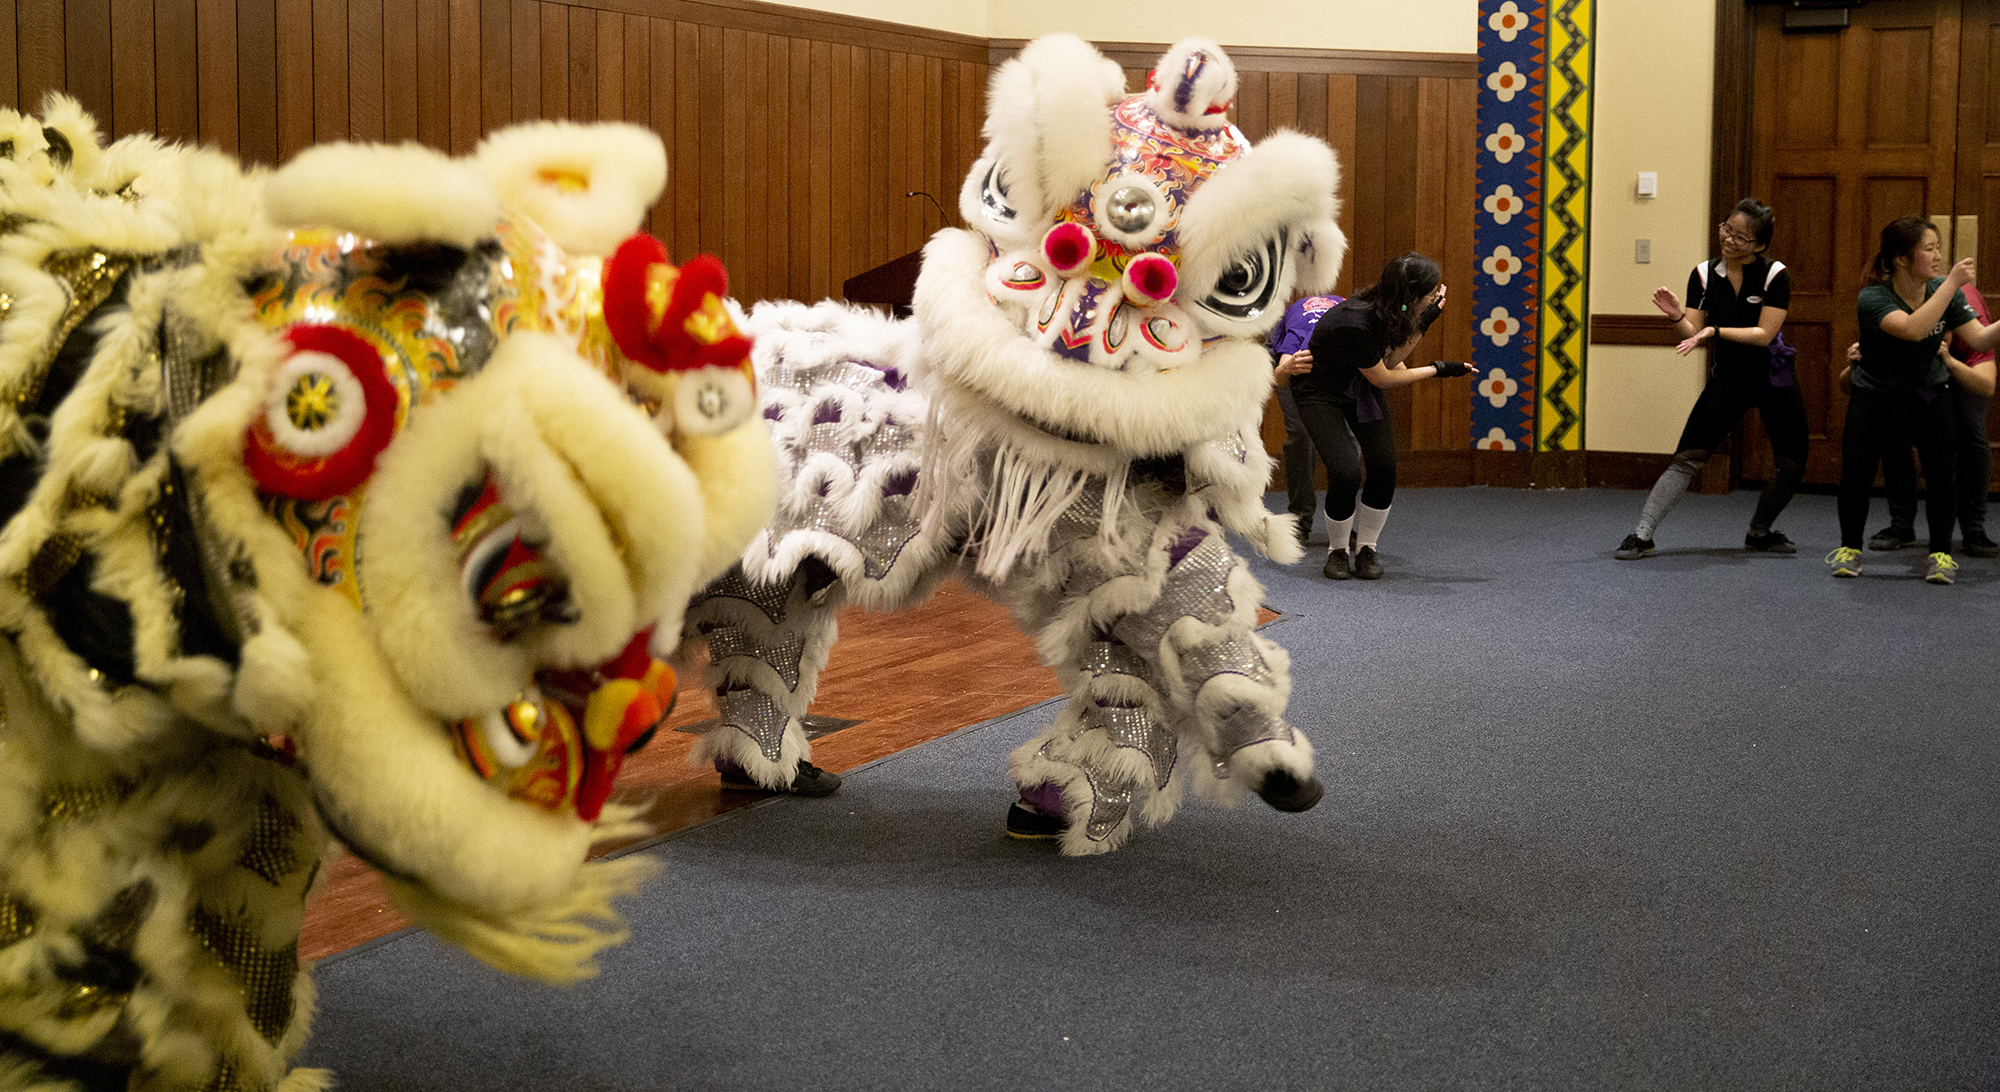 Two lion costumes that each have two students inside during performance.